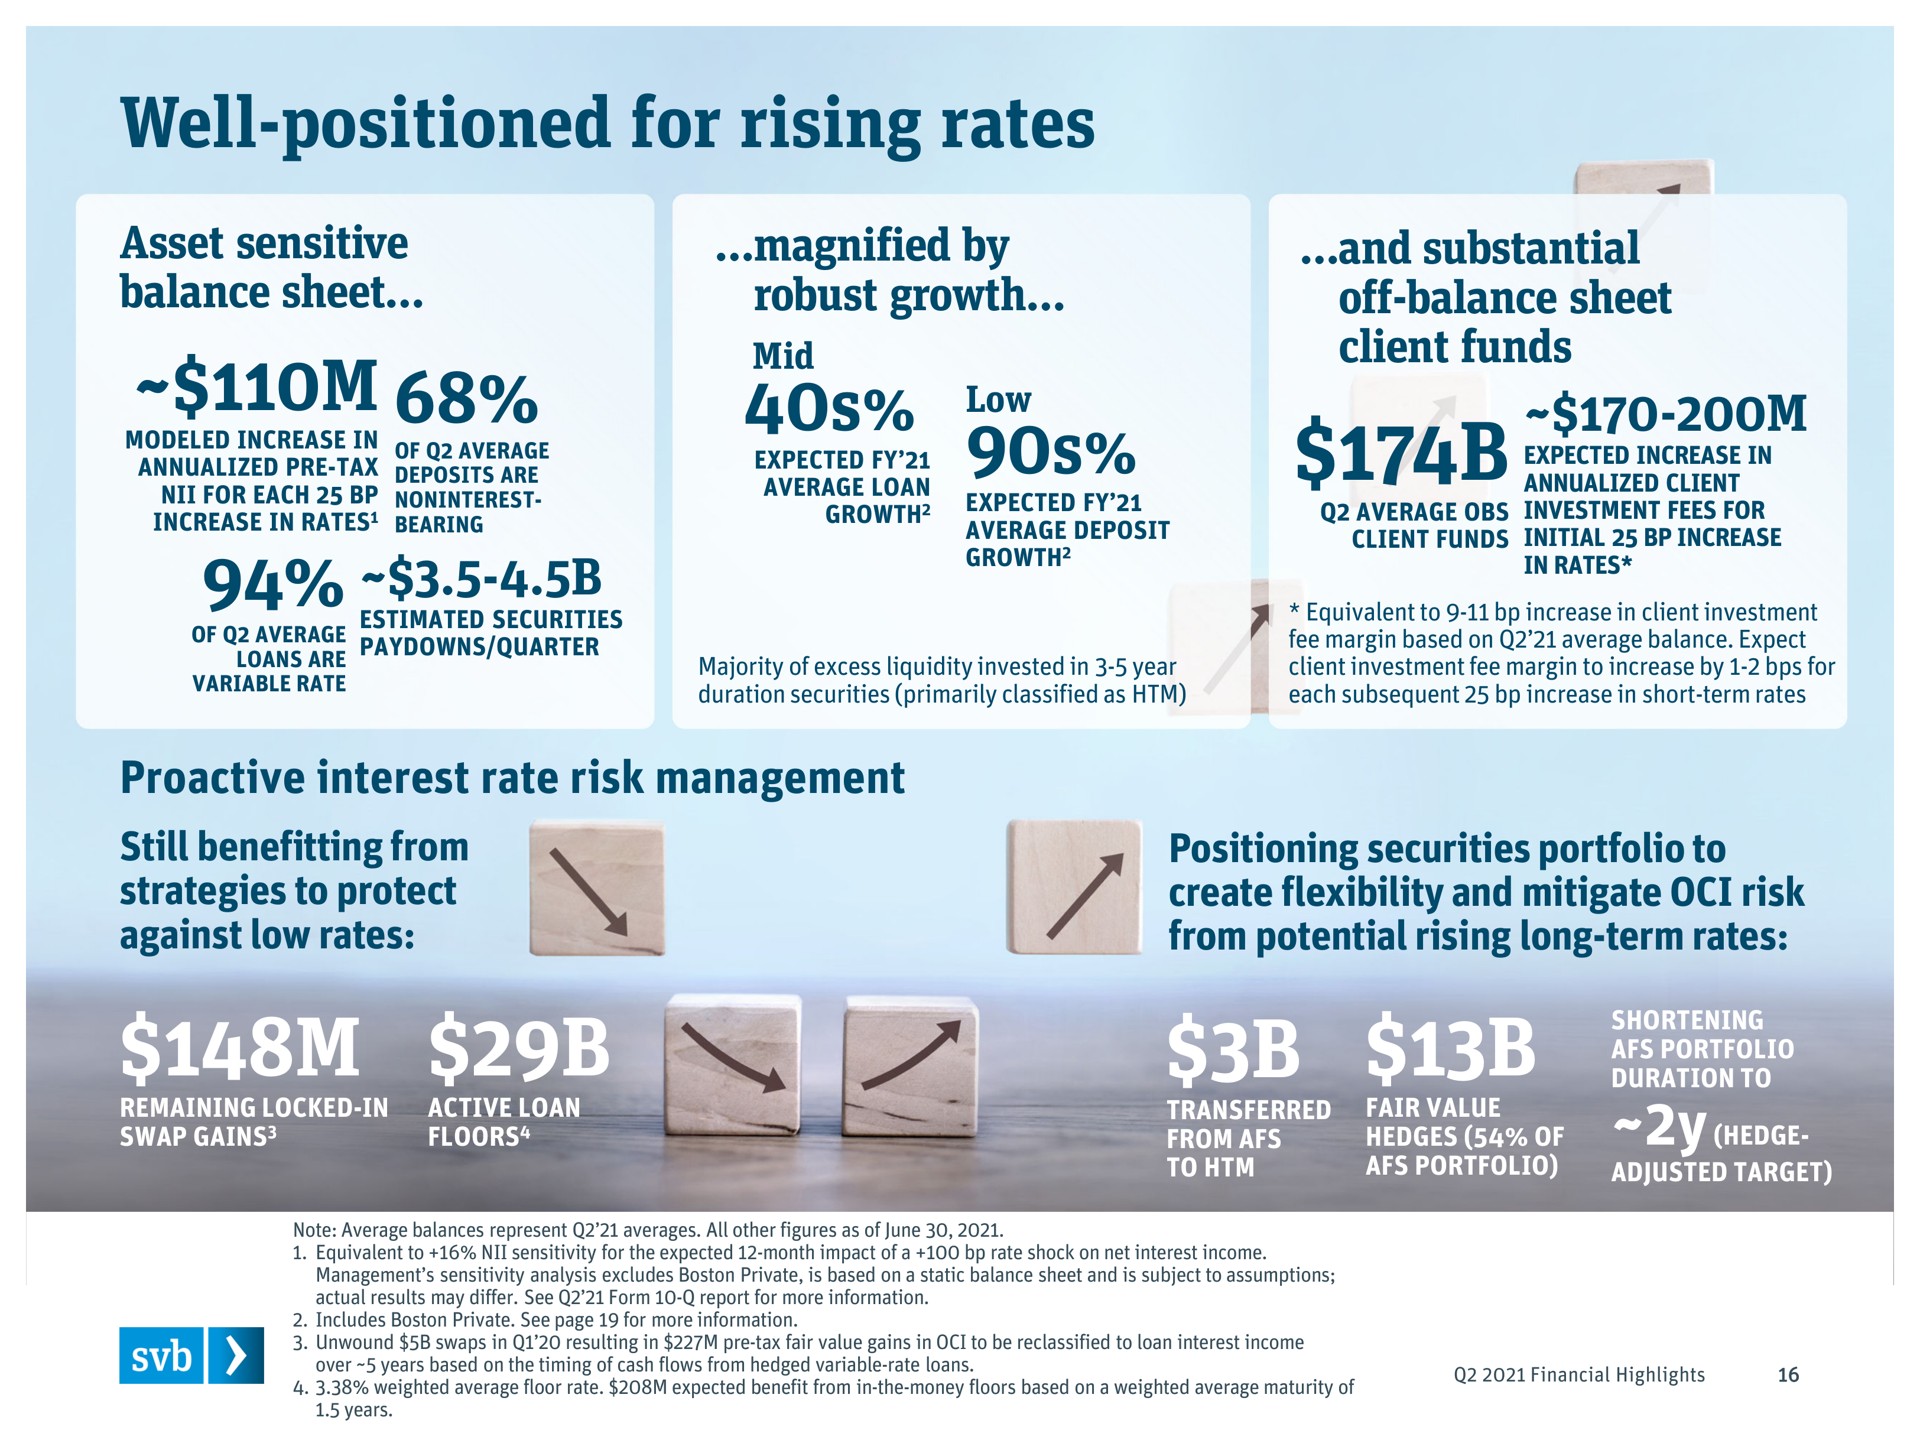 well positioned for rising rates asset sensitive balance sheet magnified by robust growth and substantial off balance sheet client funds interest rate risk management | Silicon Valley Bank